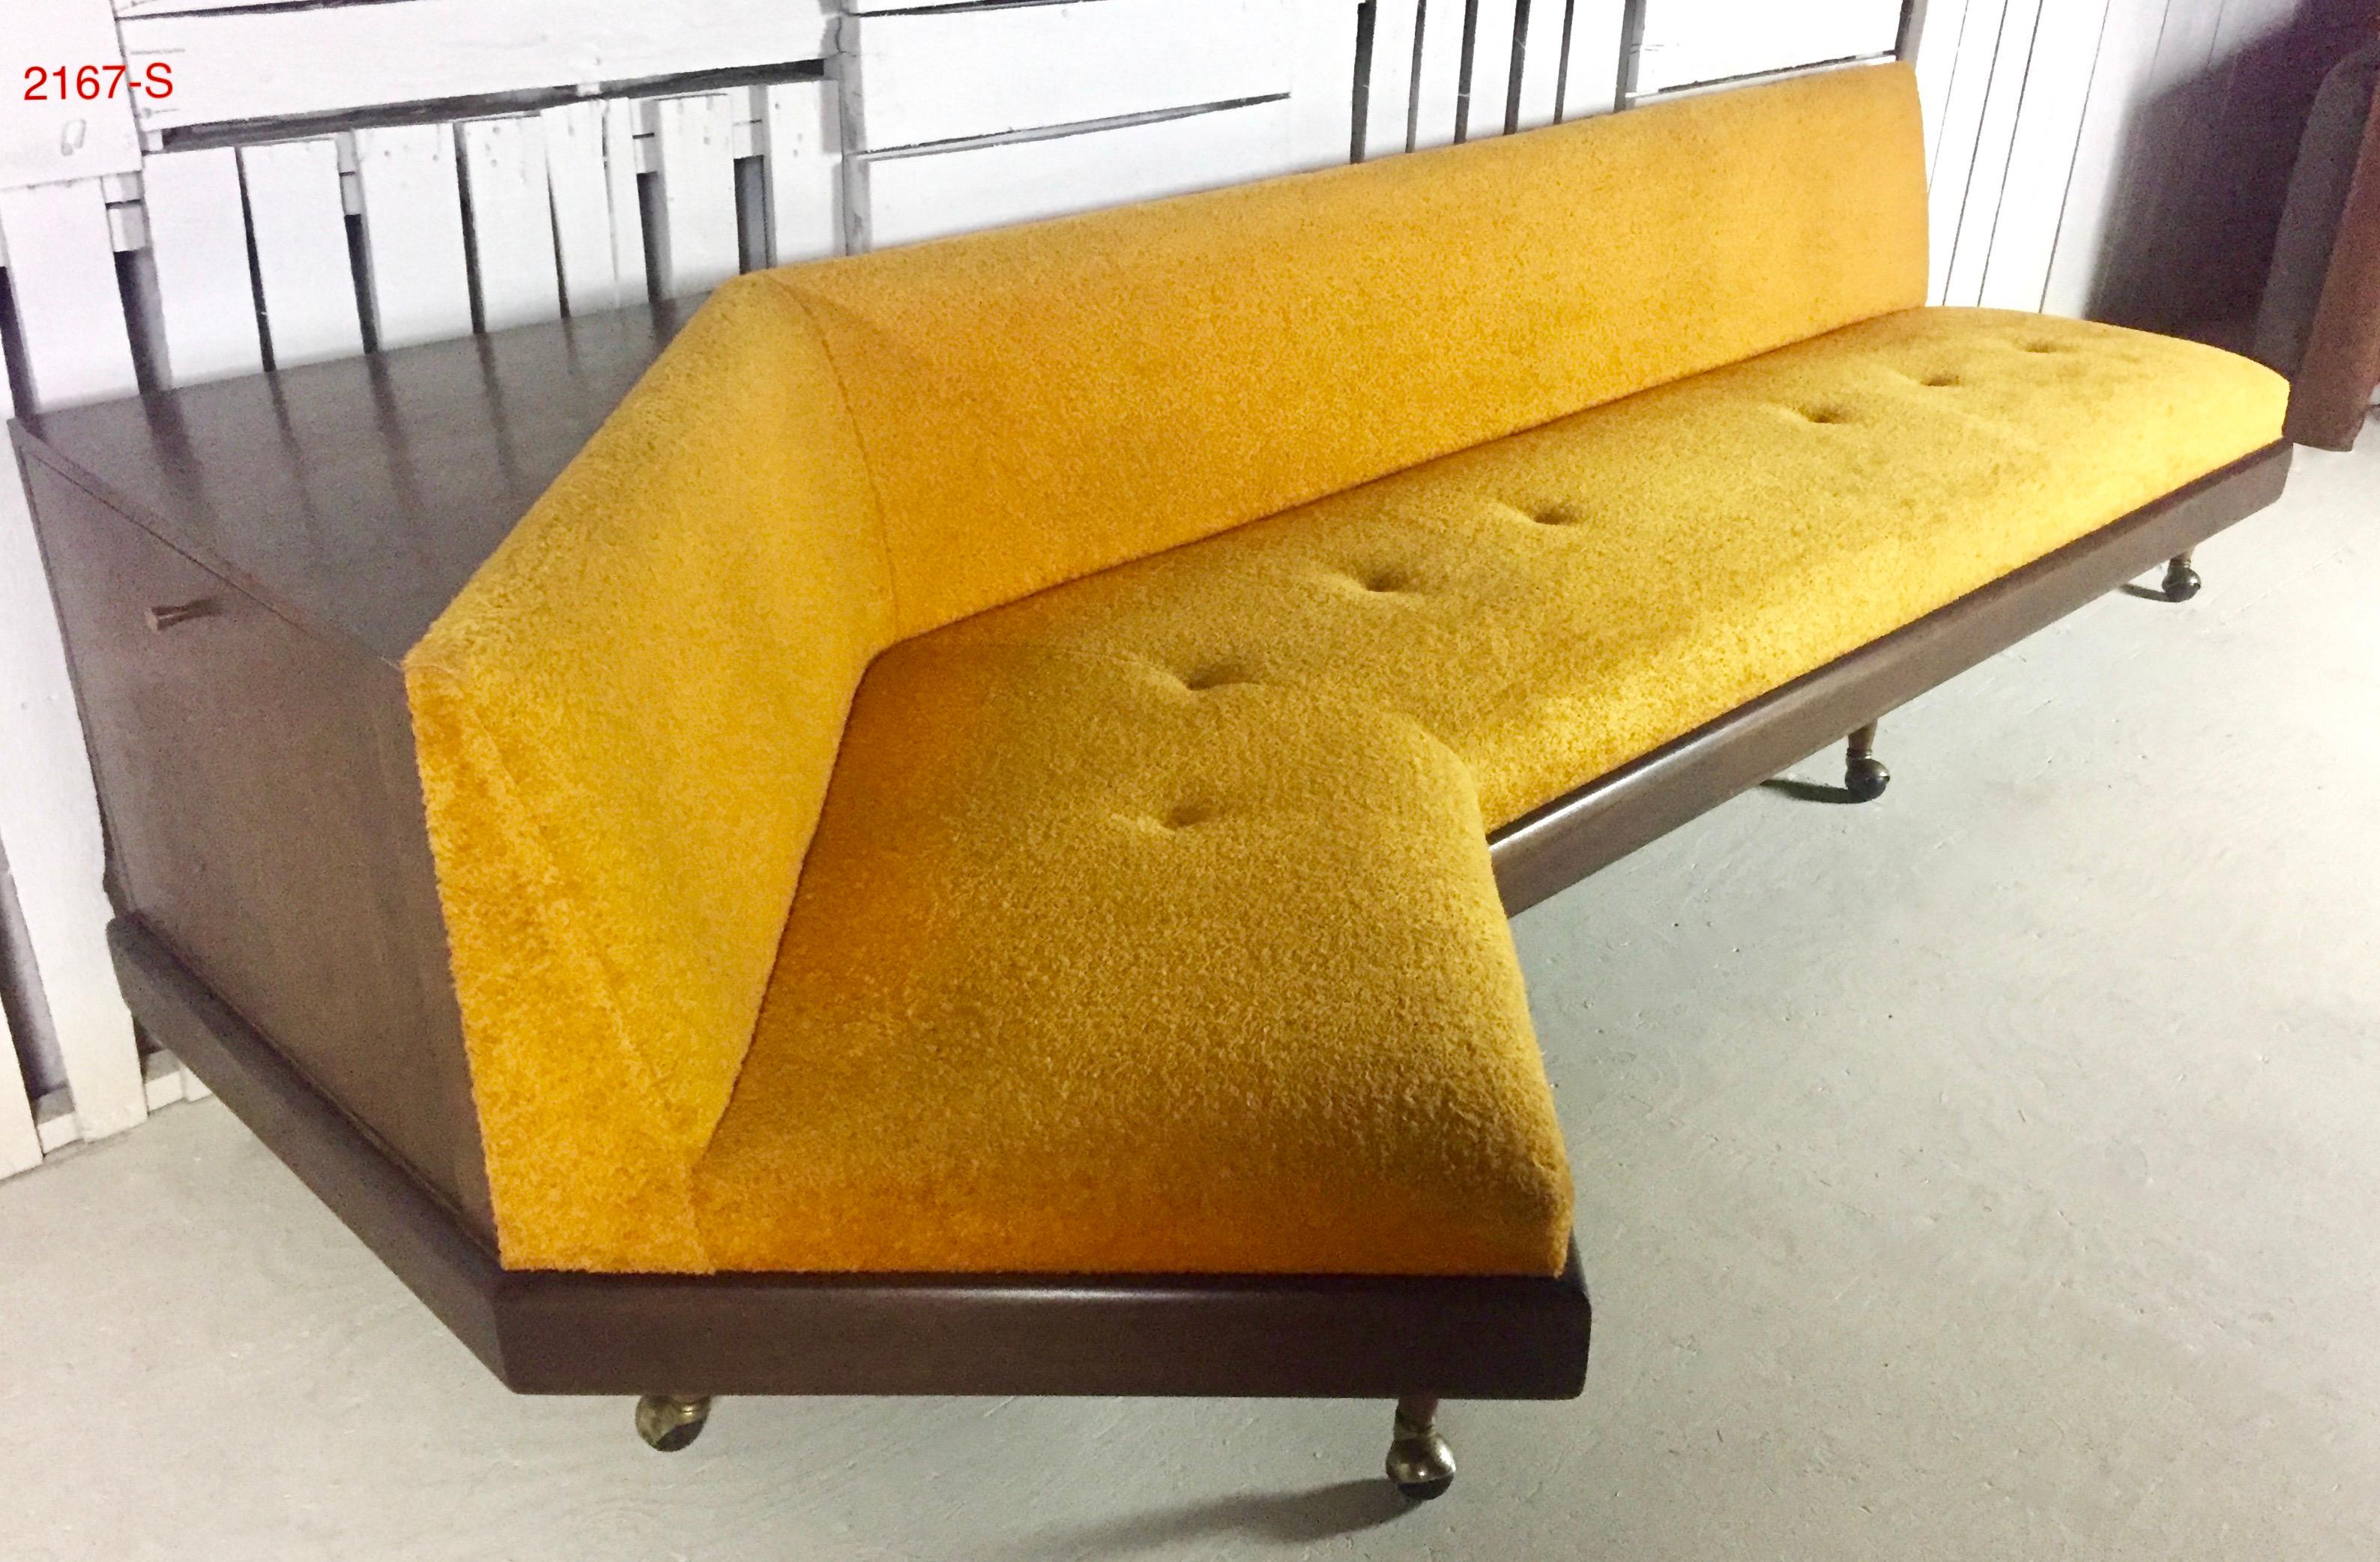 Adrian Pearsall Signed Craft Associates Sofa Midcentury Built-in Cabinet 2167-s 2